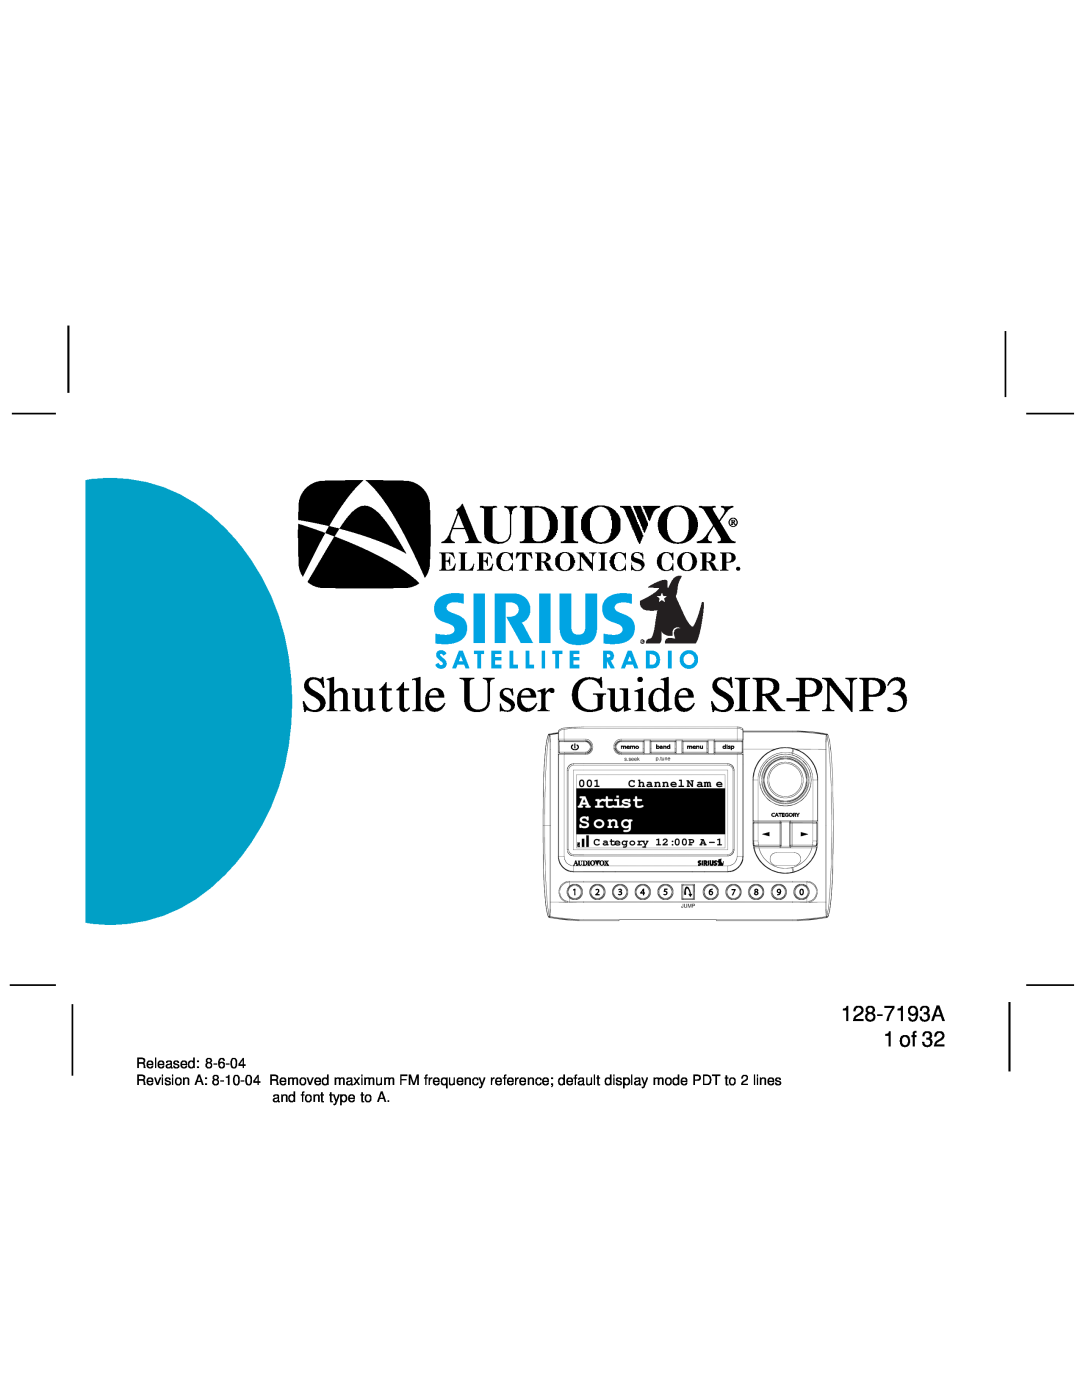 Audiovox SIRPNP3 manual 128-7193A 1 of, Shuttle User Guide SIR-PNP3, A rtist S ong, C hannel N am e, C ategory 12 00P A 